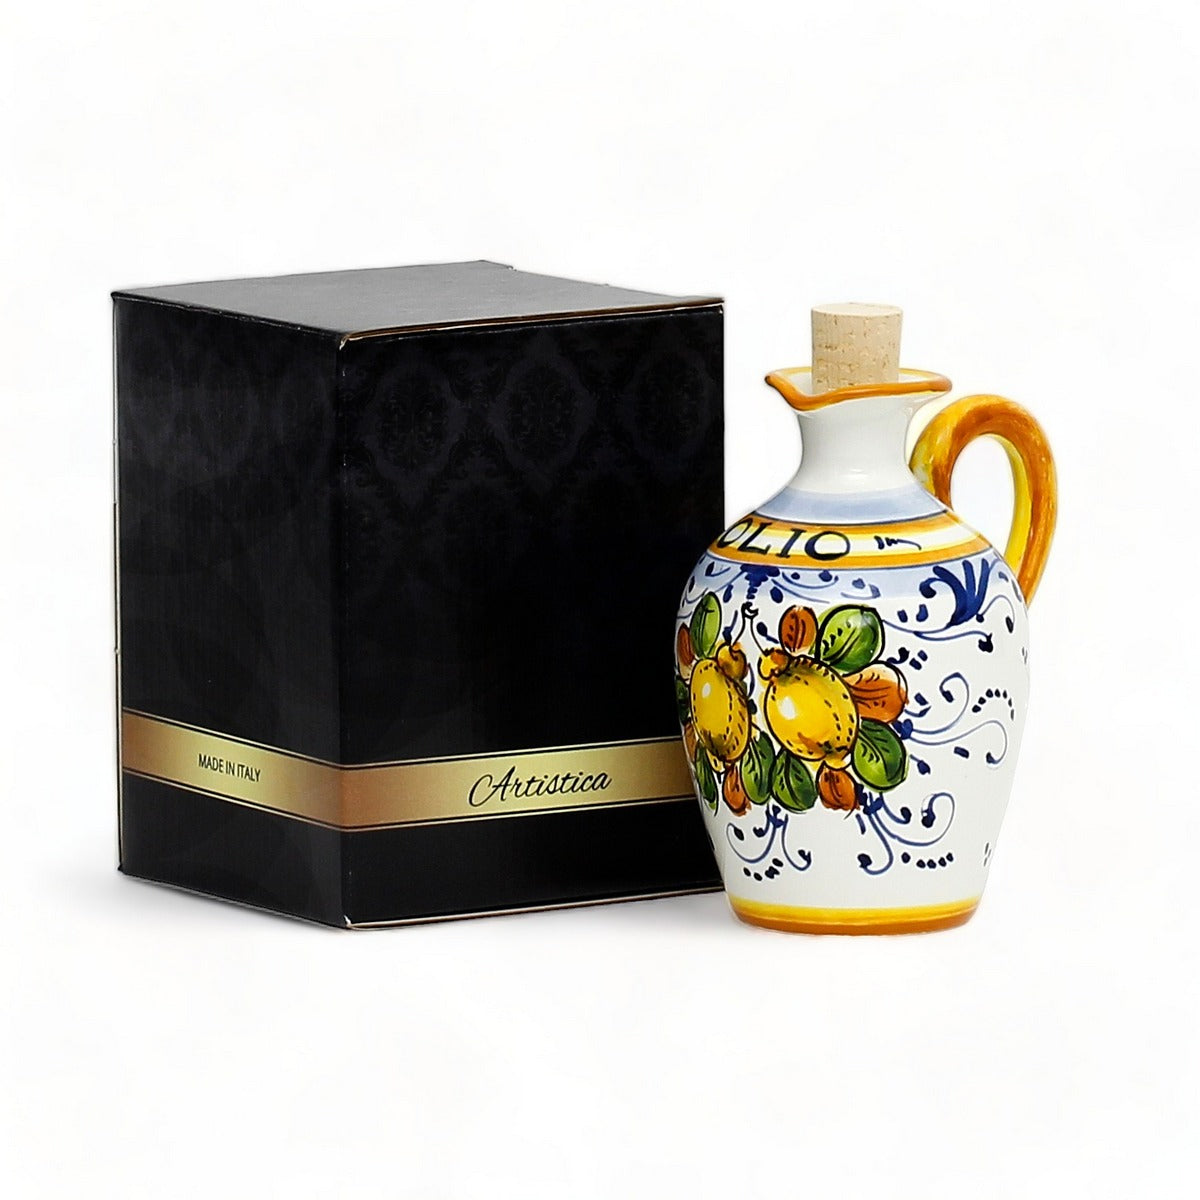 GIFT BOX: With authentic Deruta hand painted ceramic - LIMONCINI: SMALL OLIVE OIL BOTTLE DISPENSER WITH HANDLE